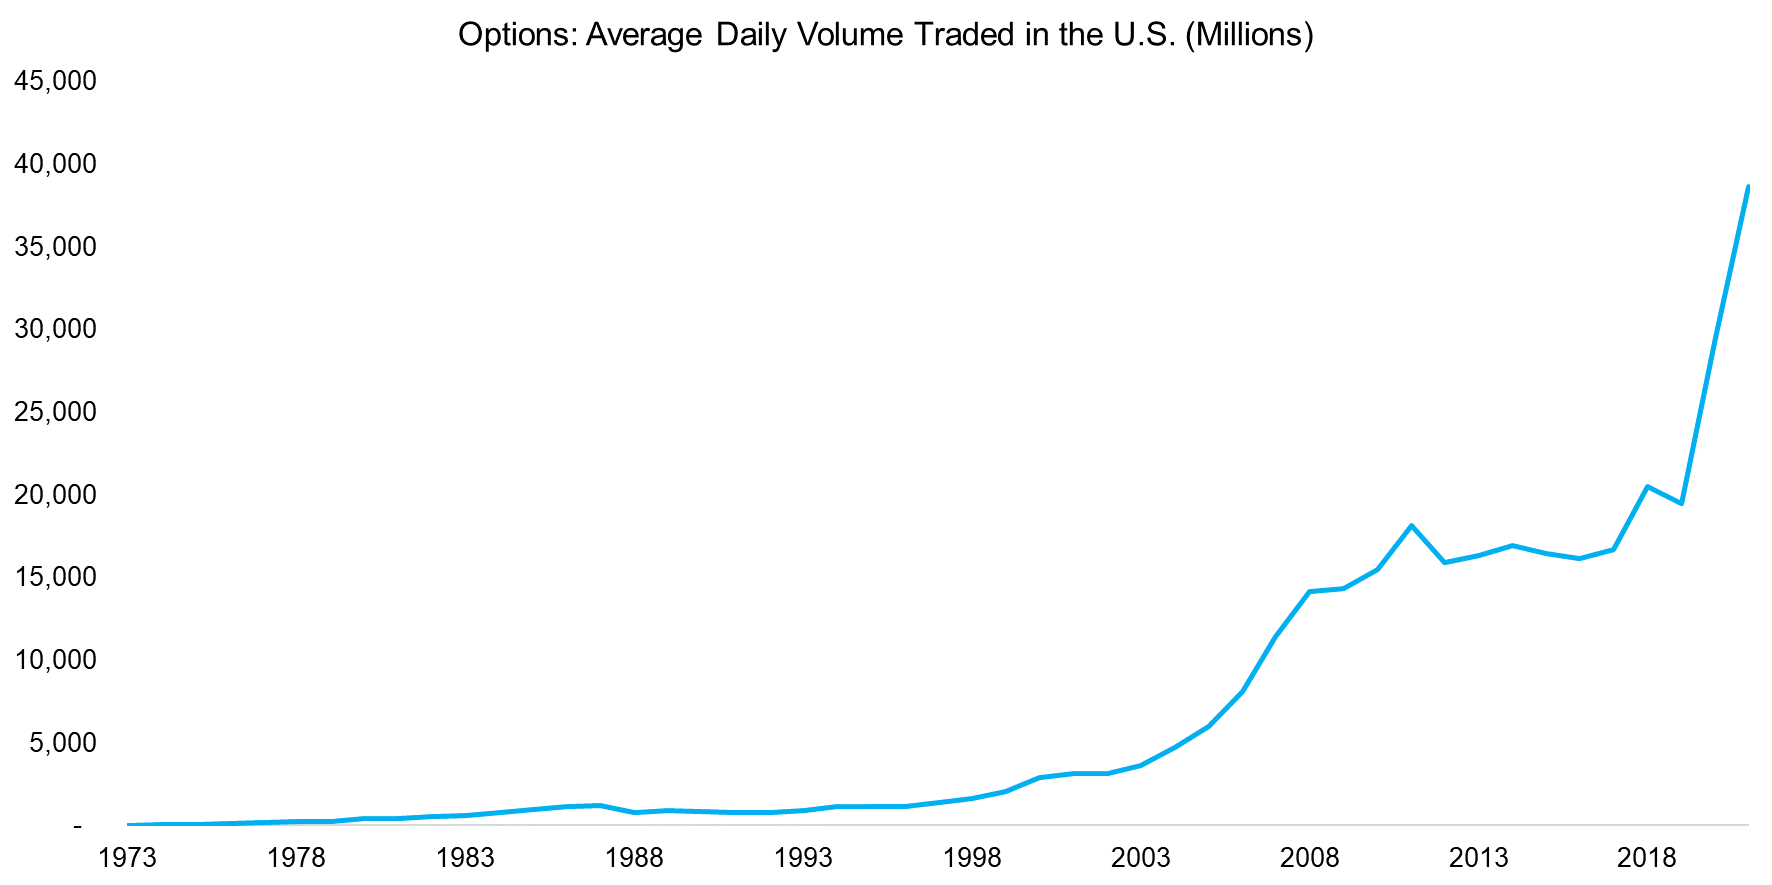 Options Average Daily Volume Traded in the U.S. (Millions)